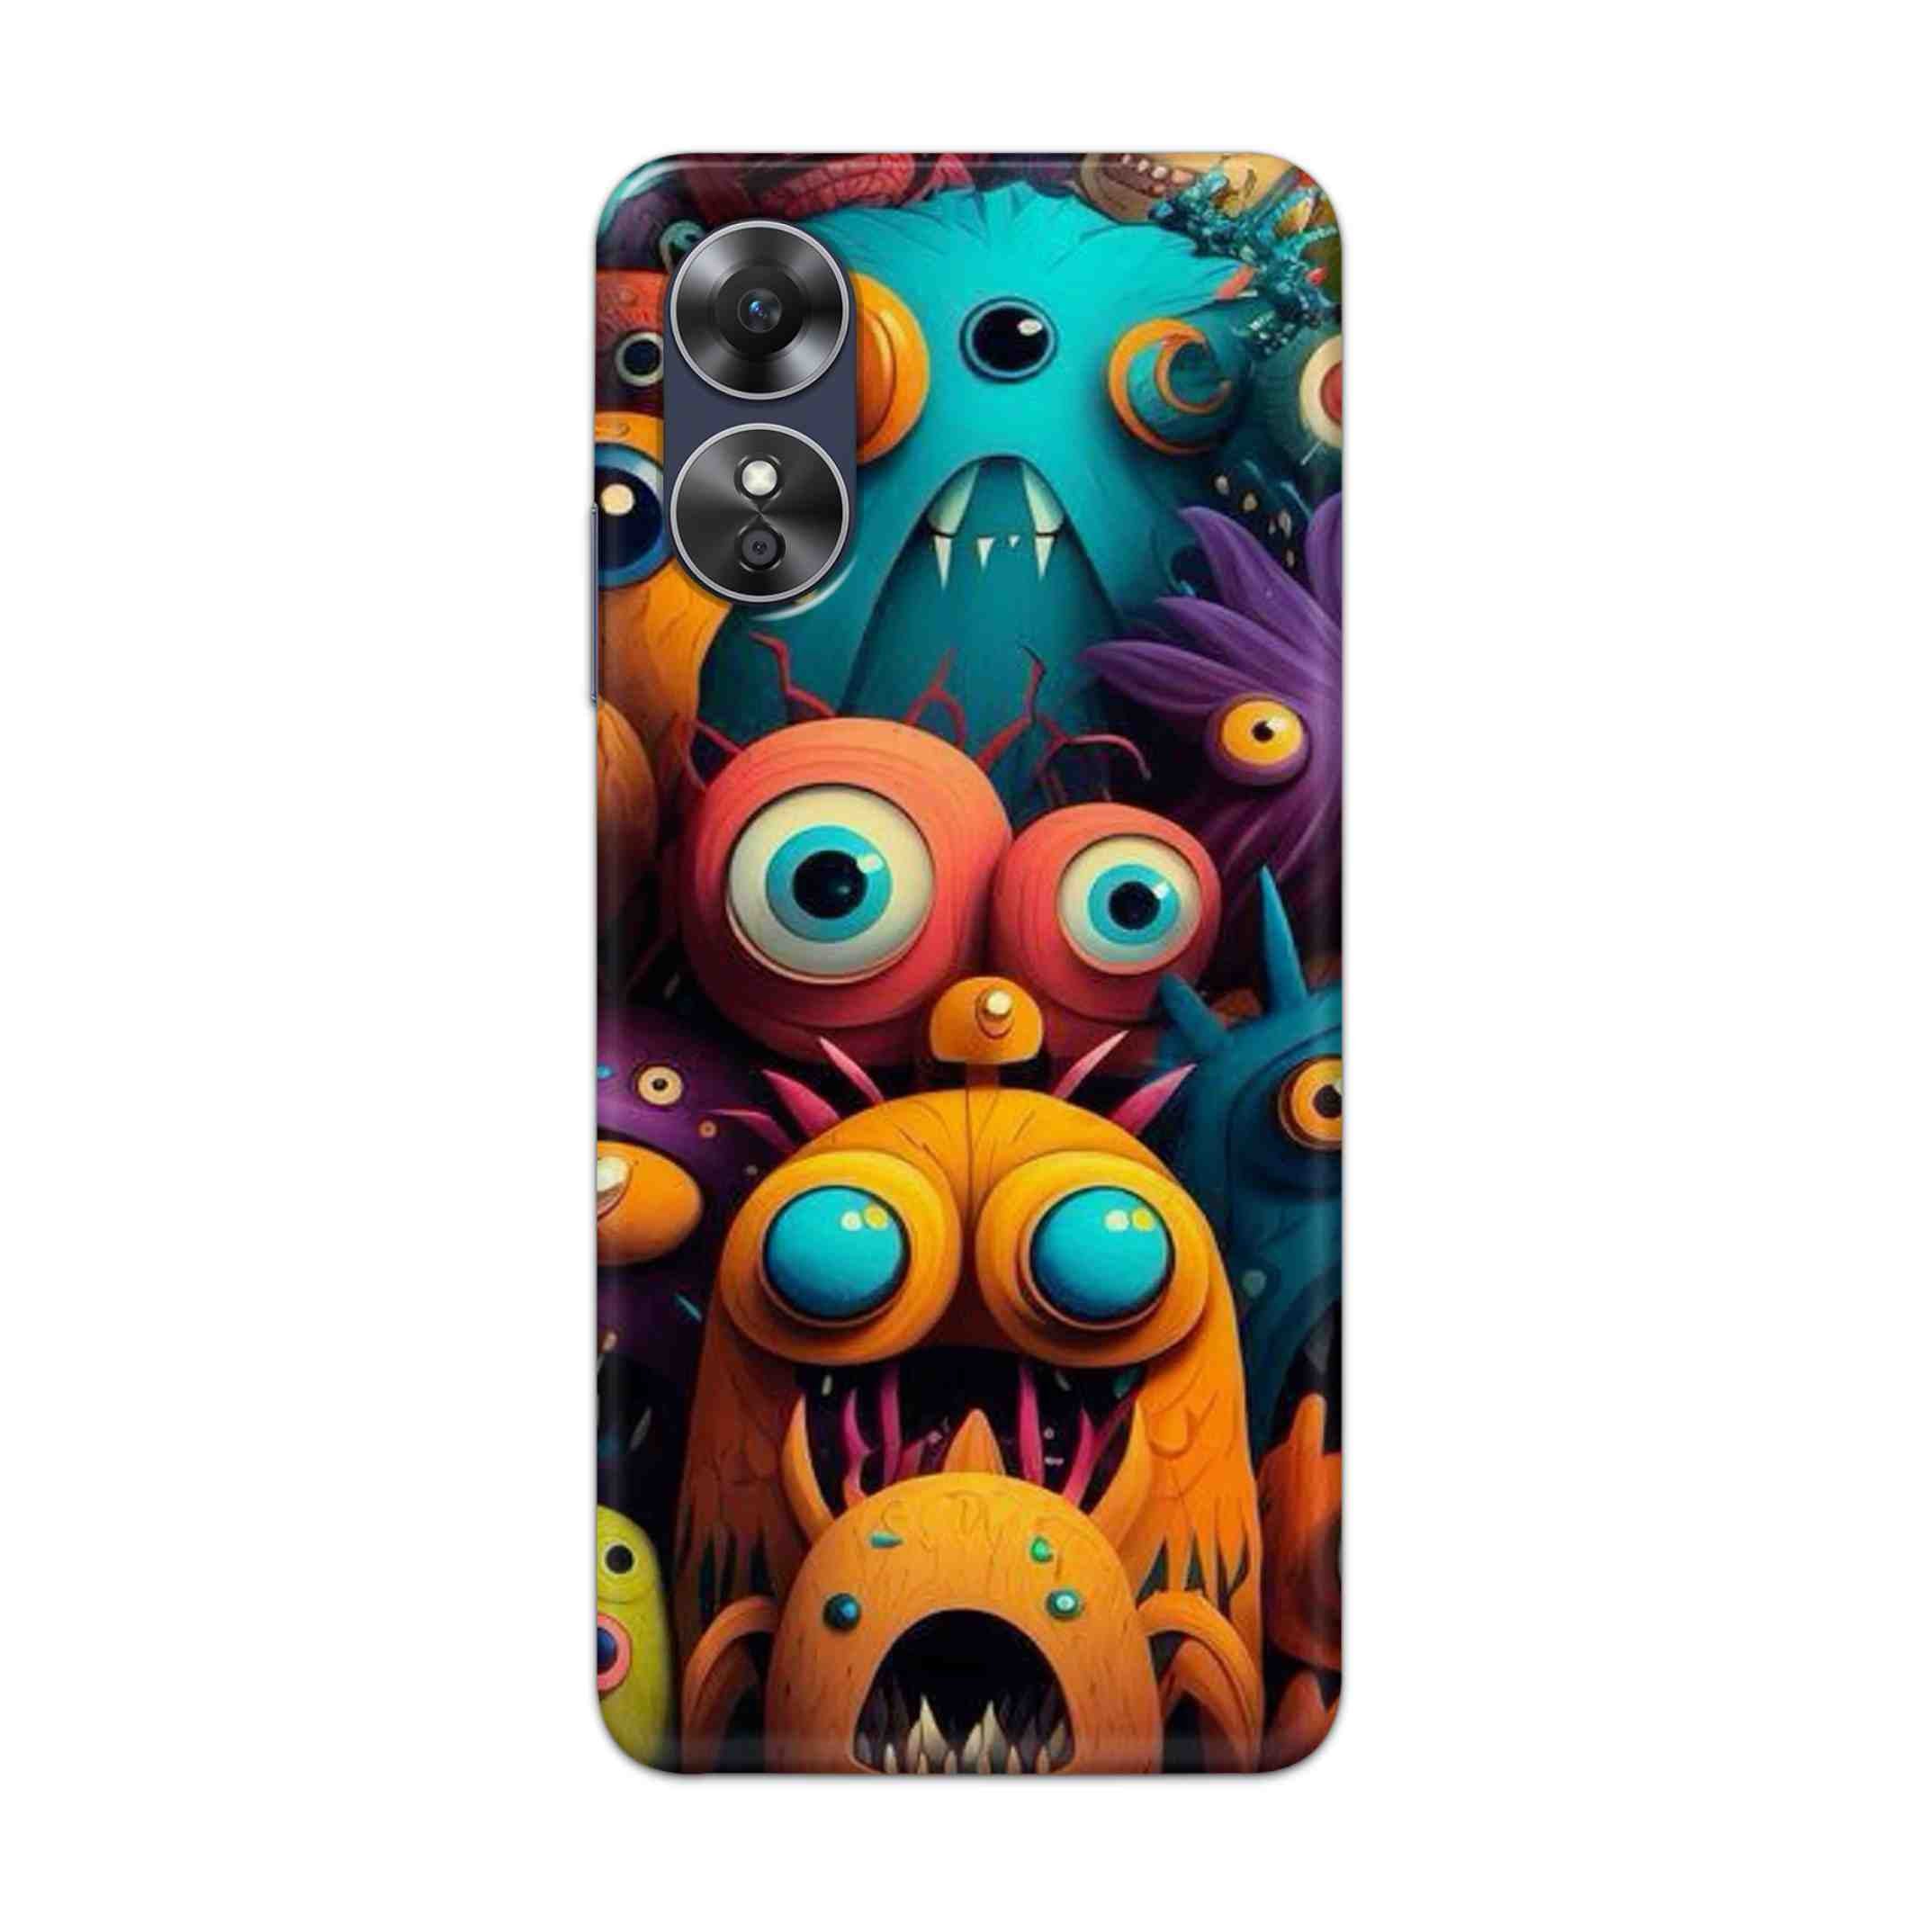 Buy Zombie Hard Back Mobile Phone Case Cover For Oppo A17 Online